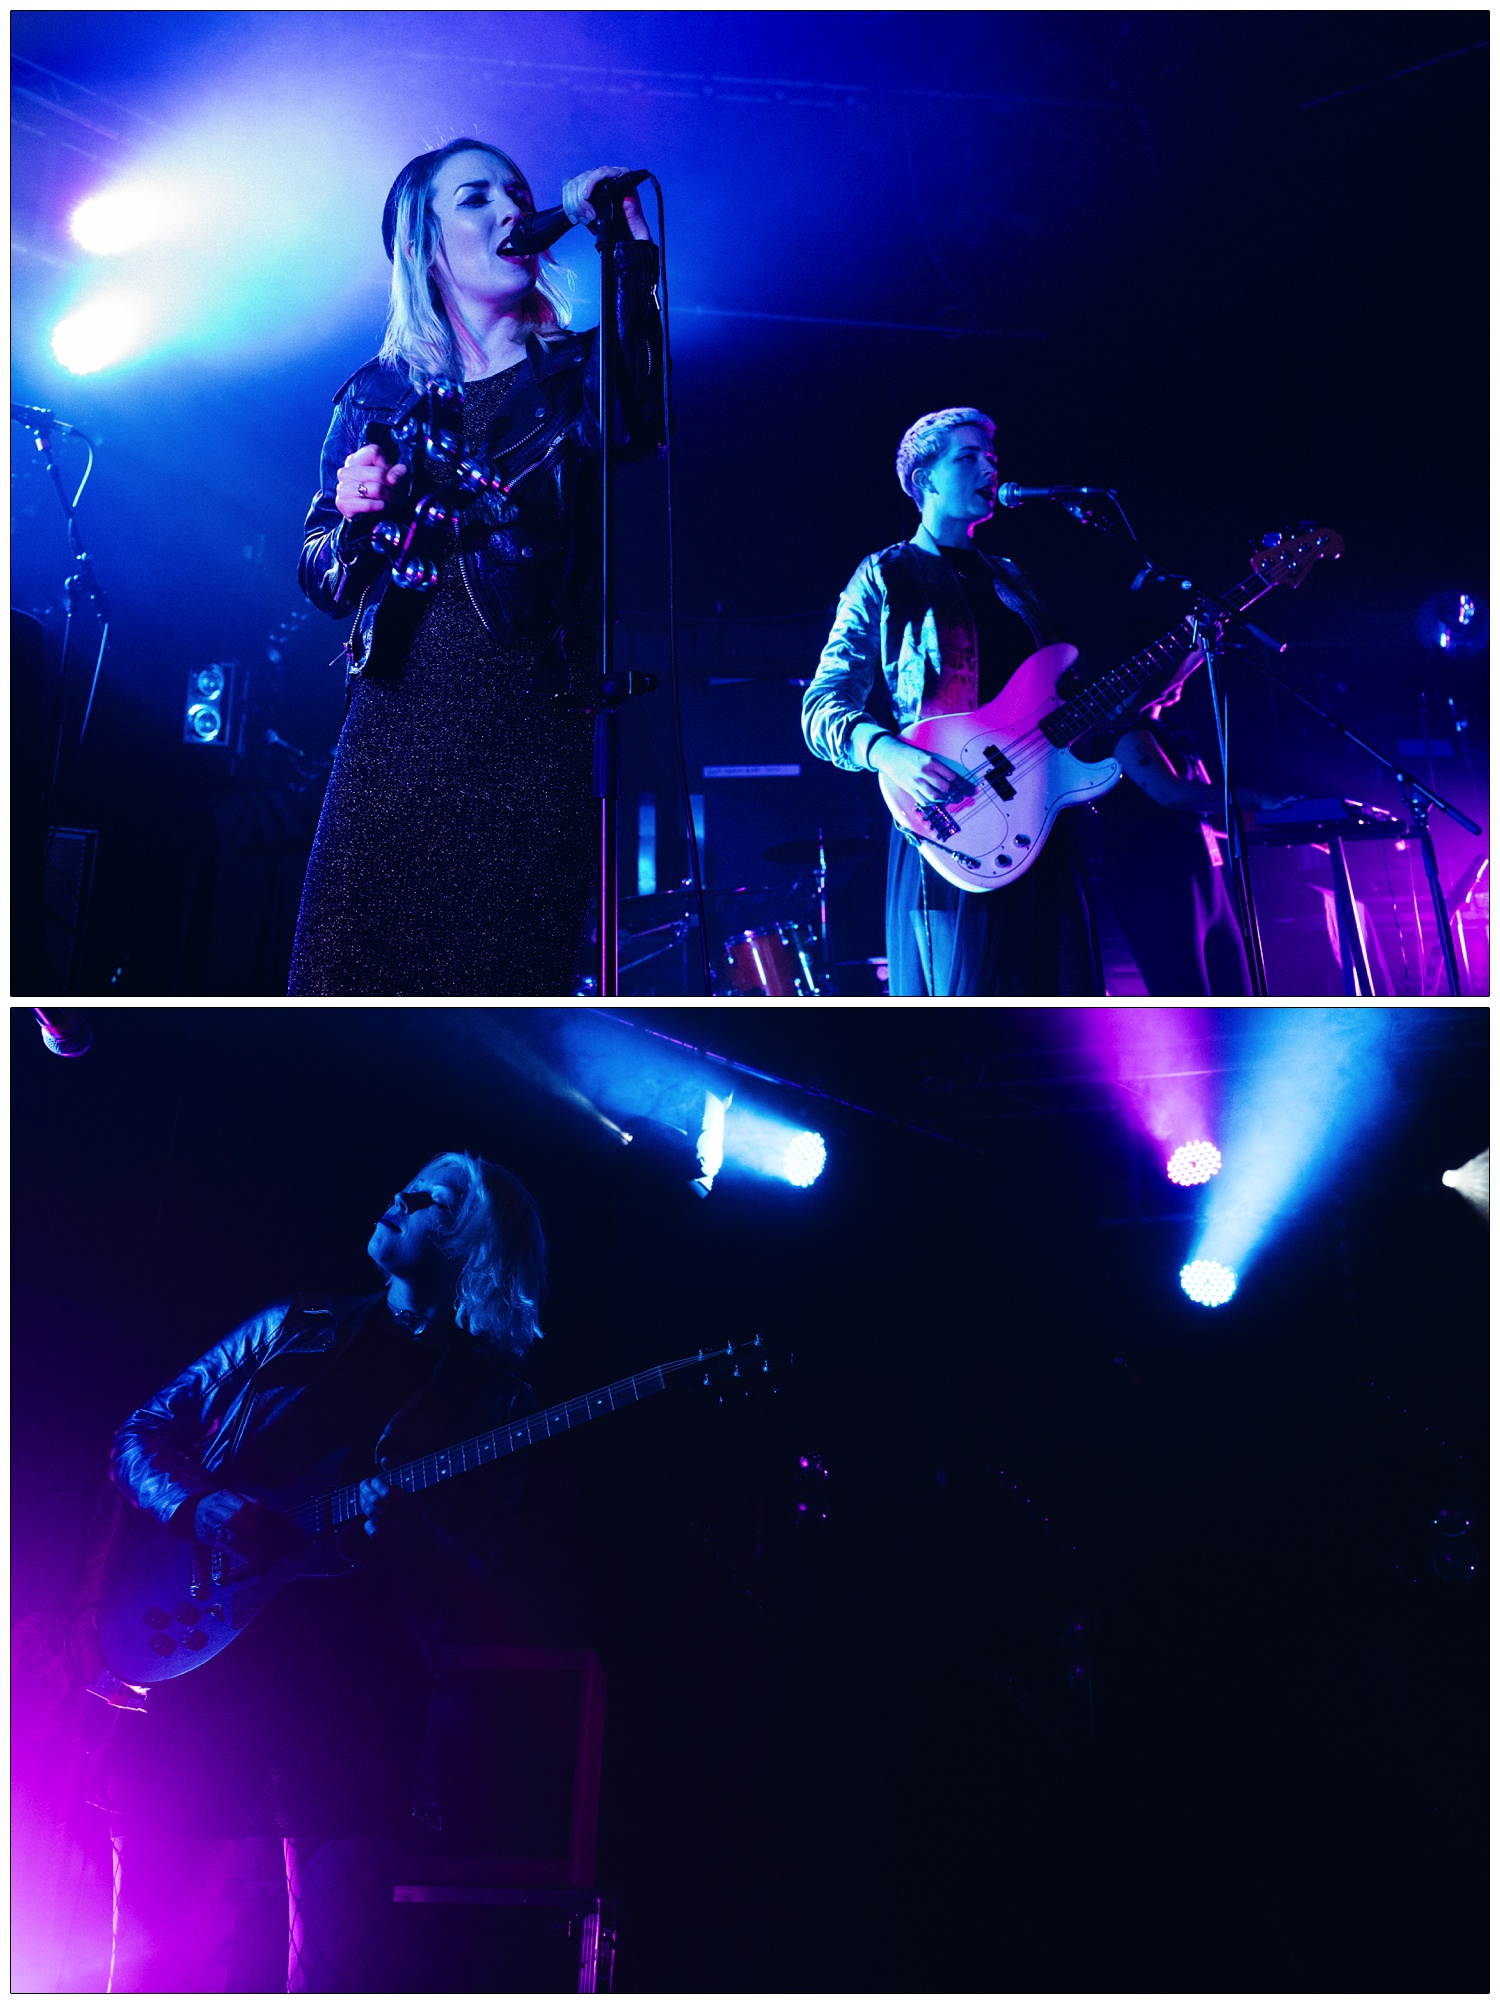 Faith Vern singing on stage, Lois Macdonald on guitar, with band PINS supporting Maxïmo Park. The stage lighting is blue and purple.